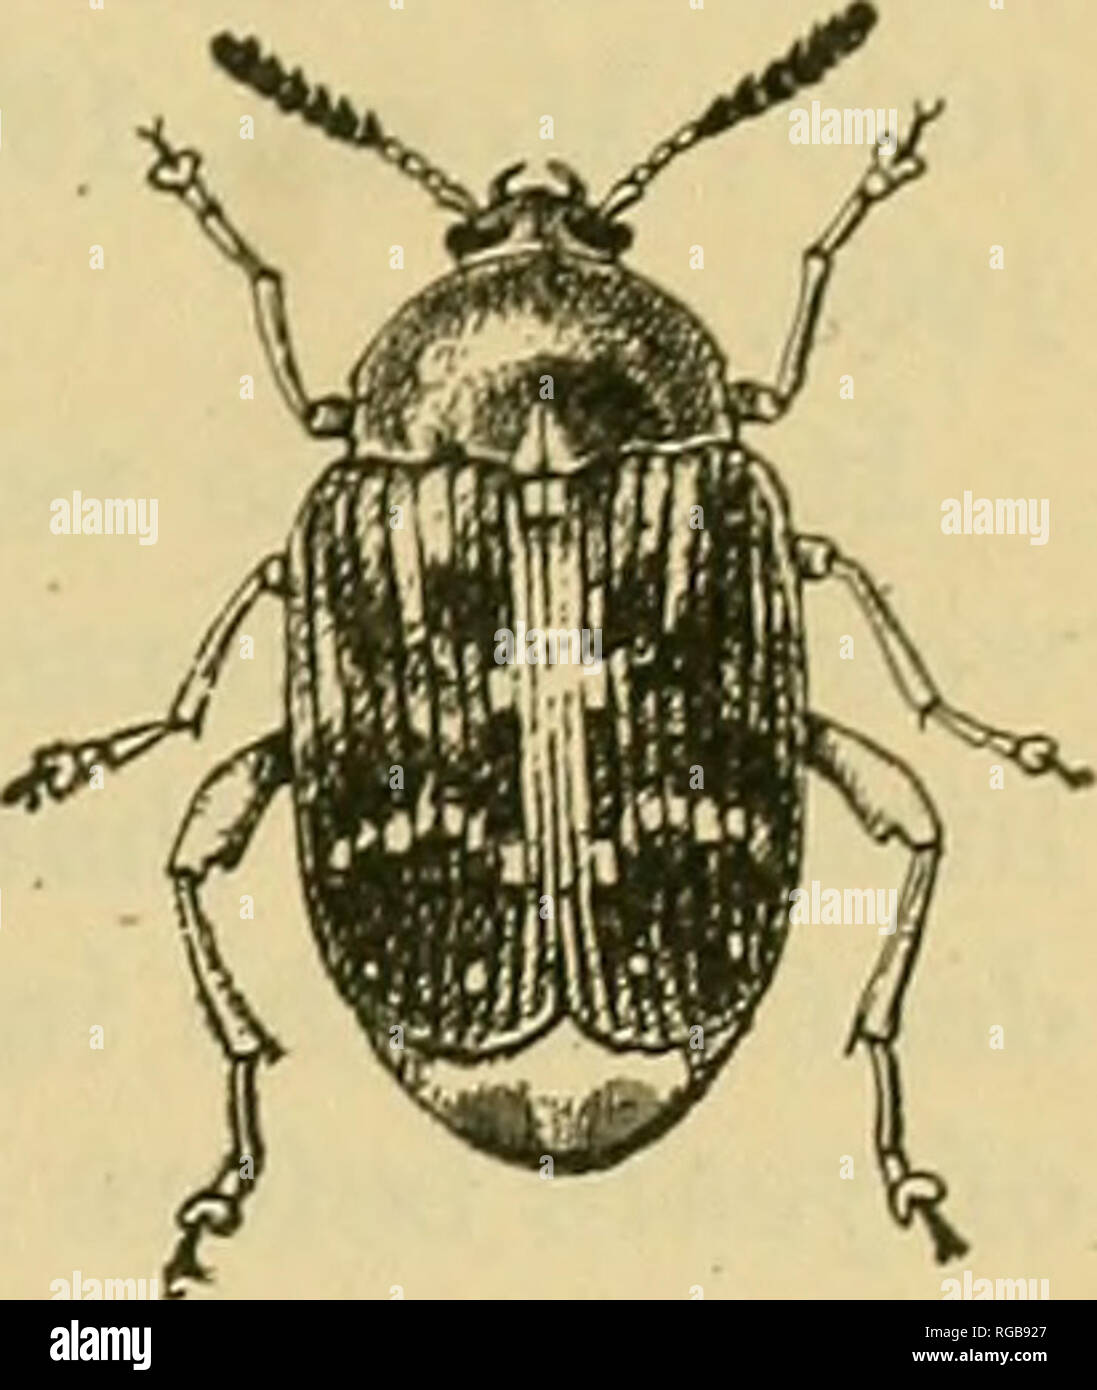 . Bulletin of the U.S. Department of Agriculture. Agriculture; Agriculture. THE BROAD-BEAN WEEVIL. THE ADULT. The adult (fig. 2) is from 3.5 to 4.5 mm. long and a little over half as wide. The general color is black, with white markings on the elytra and pygidiuni, giving it a somewhat mottled grayish appear- ance. The head is dark. The basal four joints of the antennic are reddish brown, the remainder black. The forelegs are reddish brown and black, while the middle and hind pairs are black. The species closely resembles the pea weevil {B. pisoruin L., fig. 3), but may be separated by the fol Stock Photo